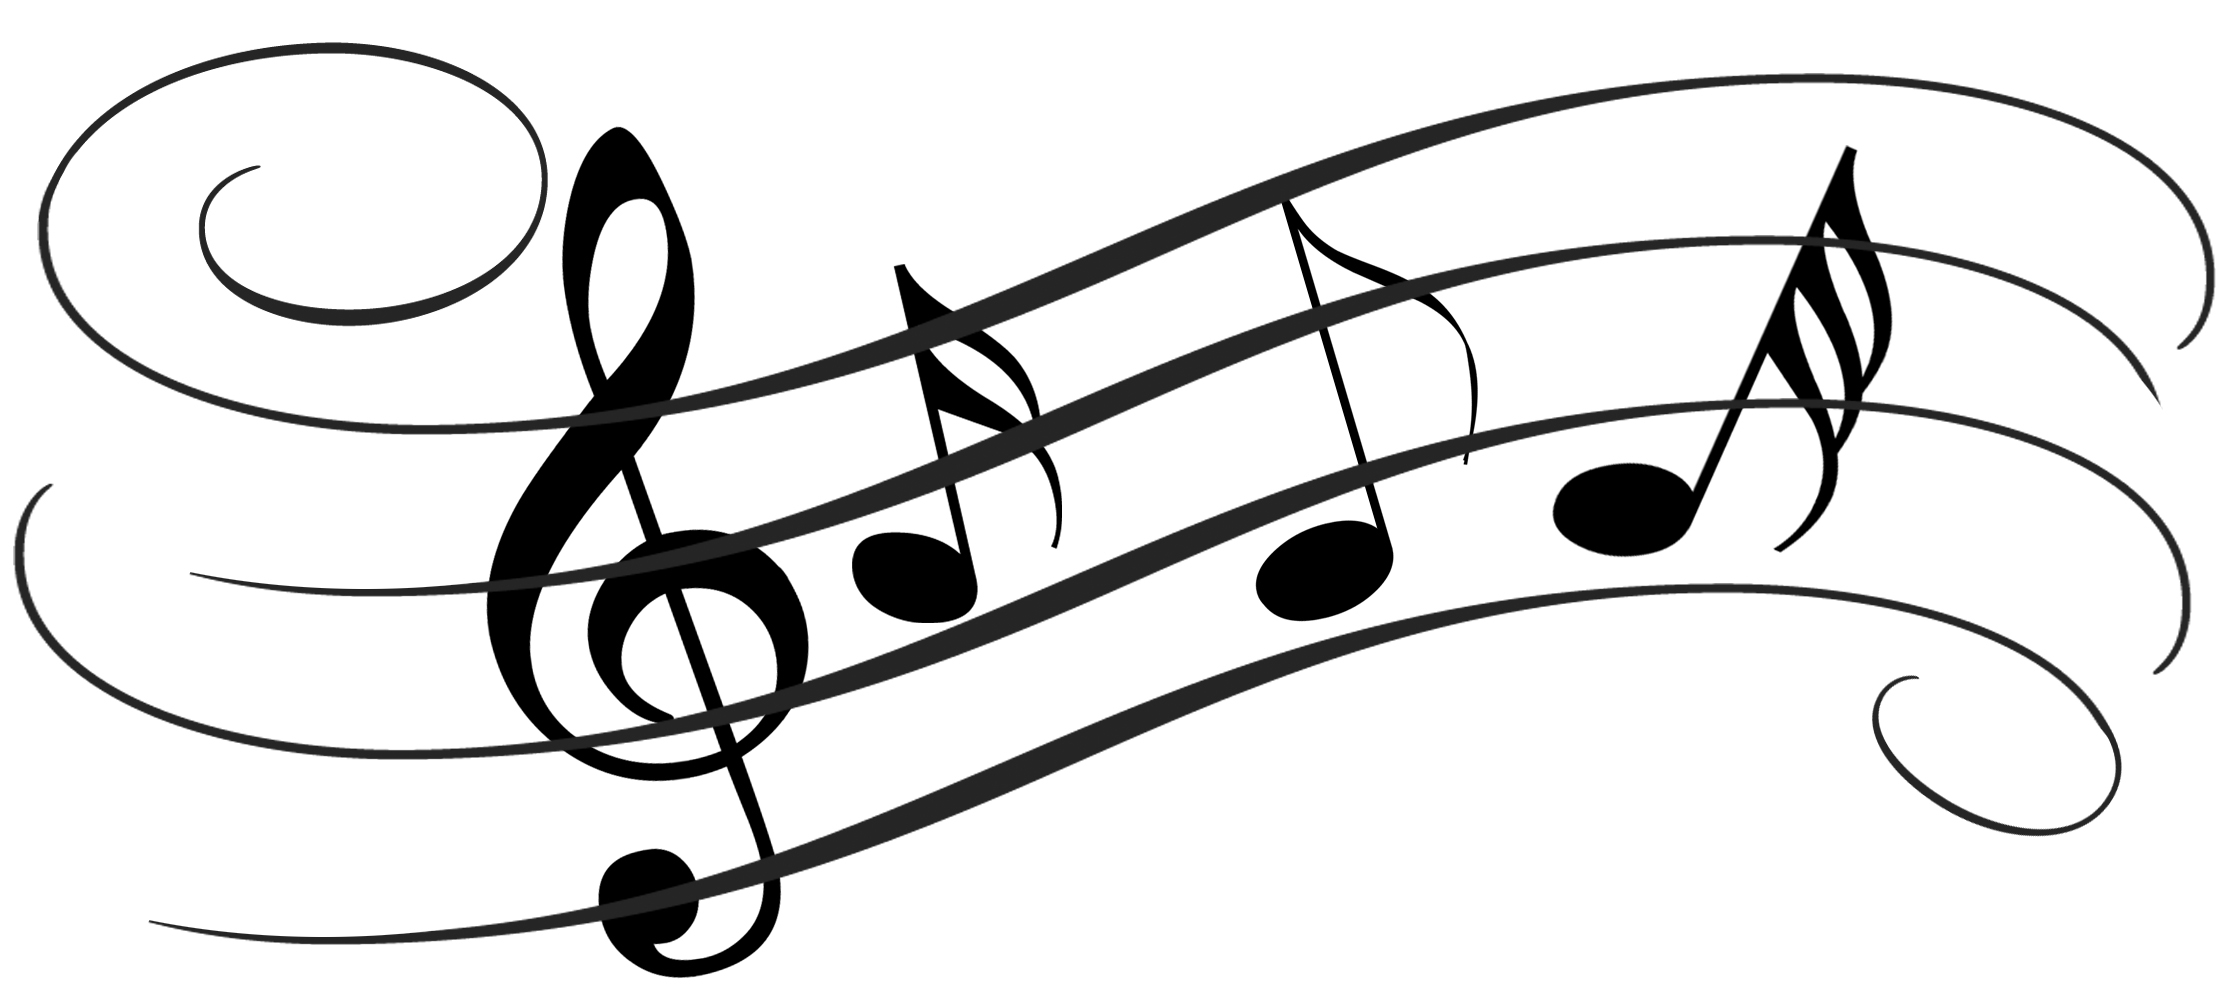 clipart of music notes and instruments - photo #3